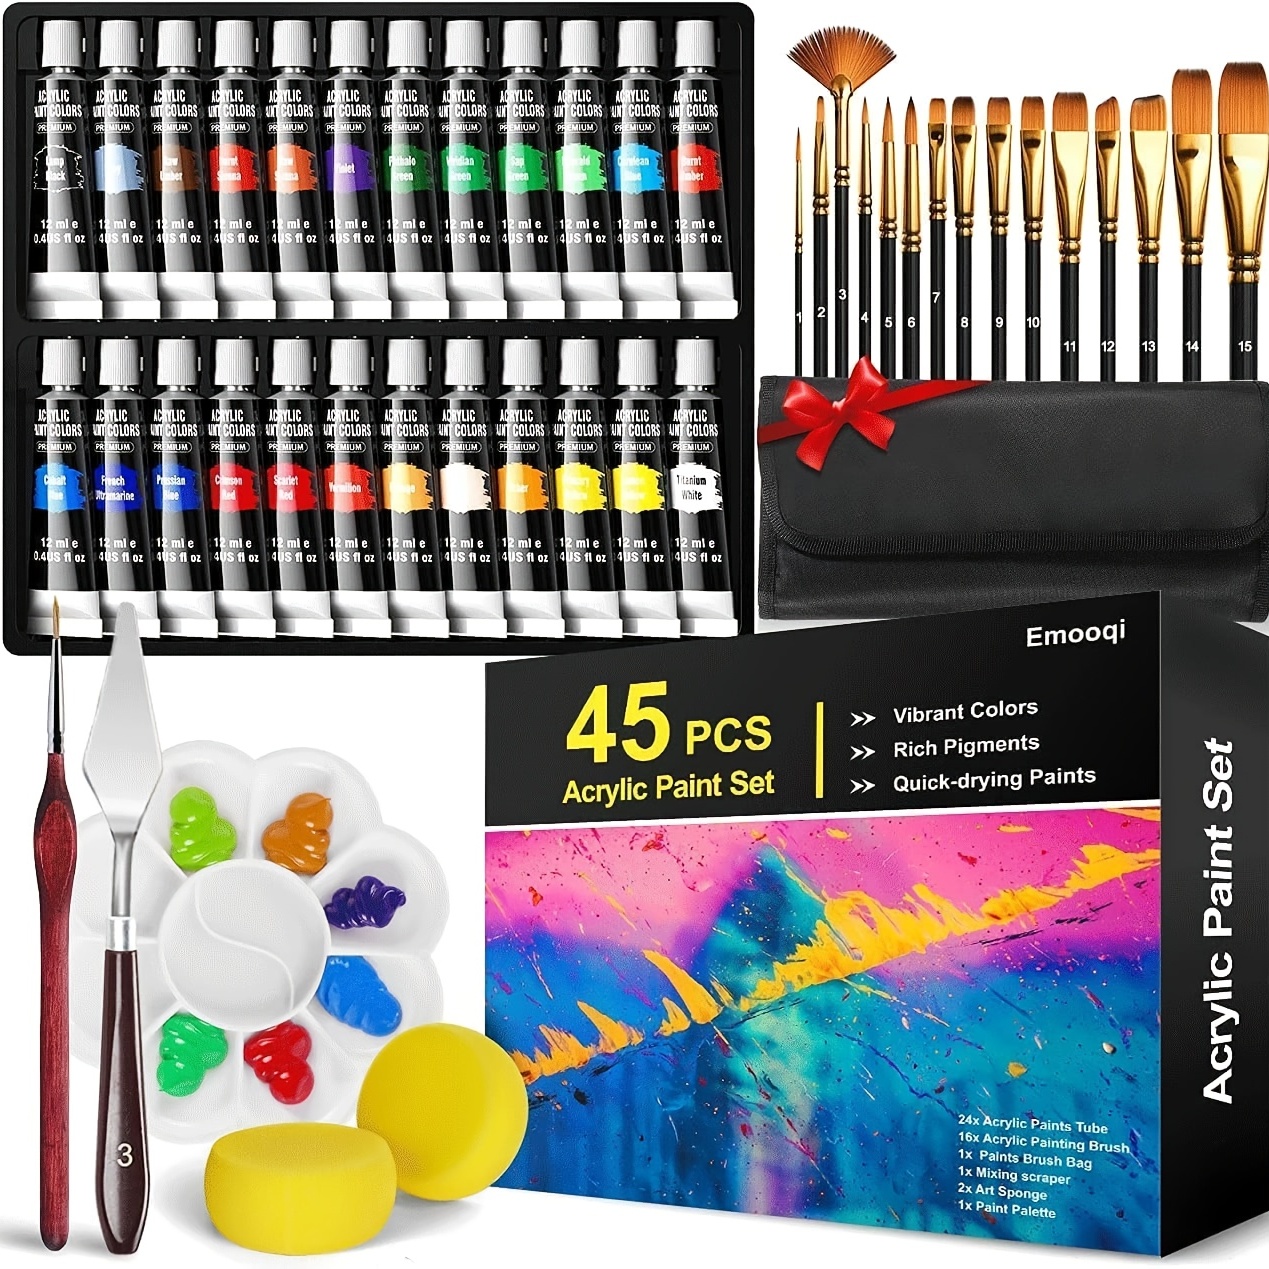 Painting Supplies Set, Including 24 Bottles Of Acrylic Paint, 16